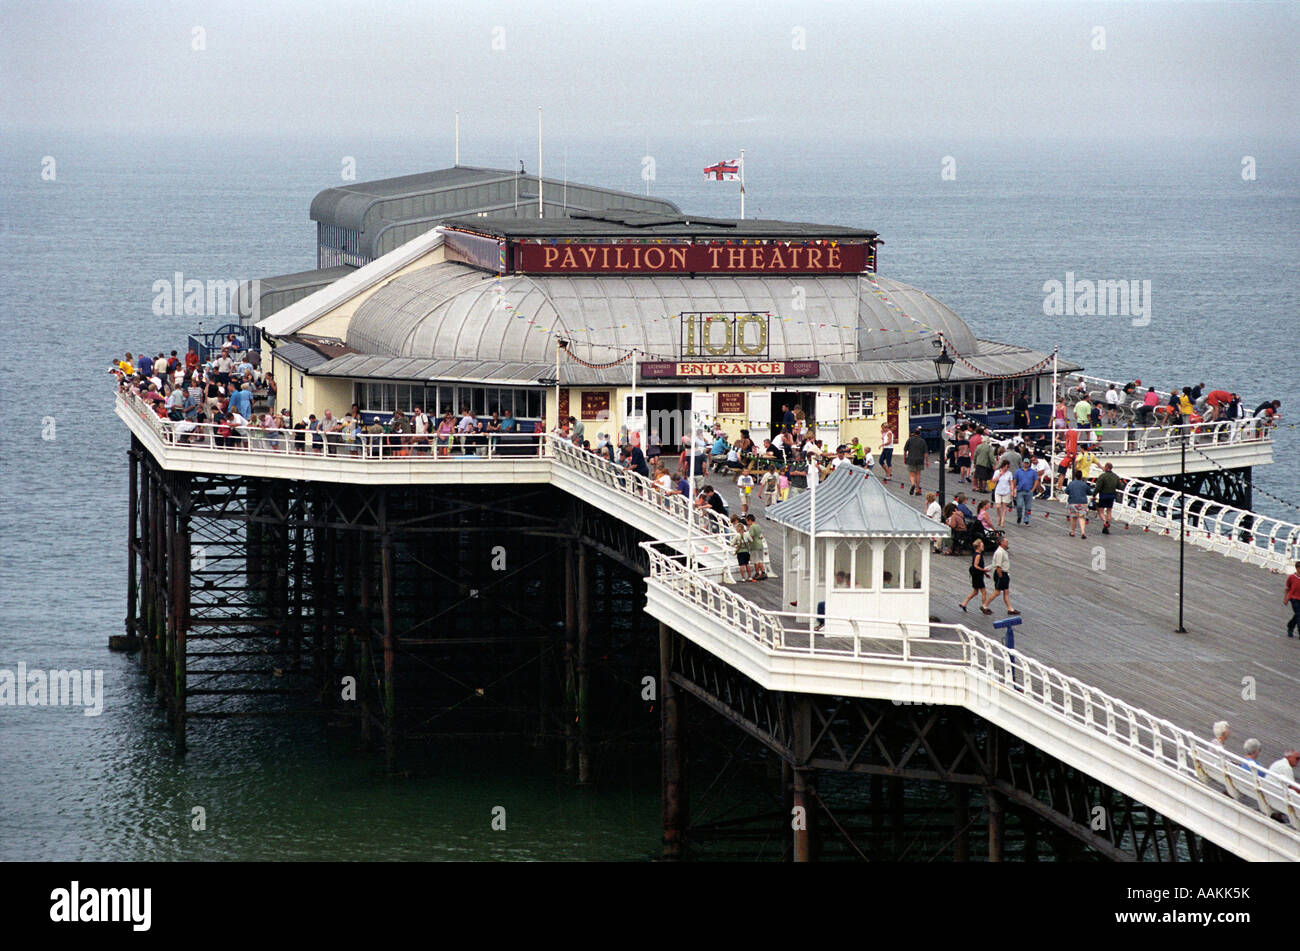 The Pavilion Theatre on the pier at Cromer in Norfolk Stock Photo